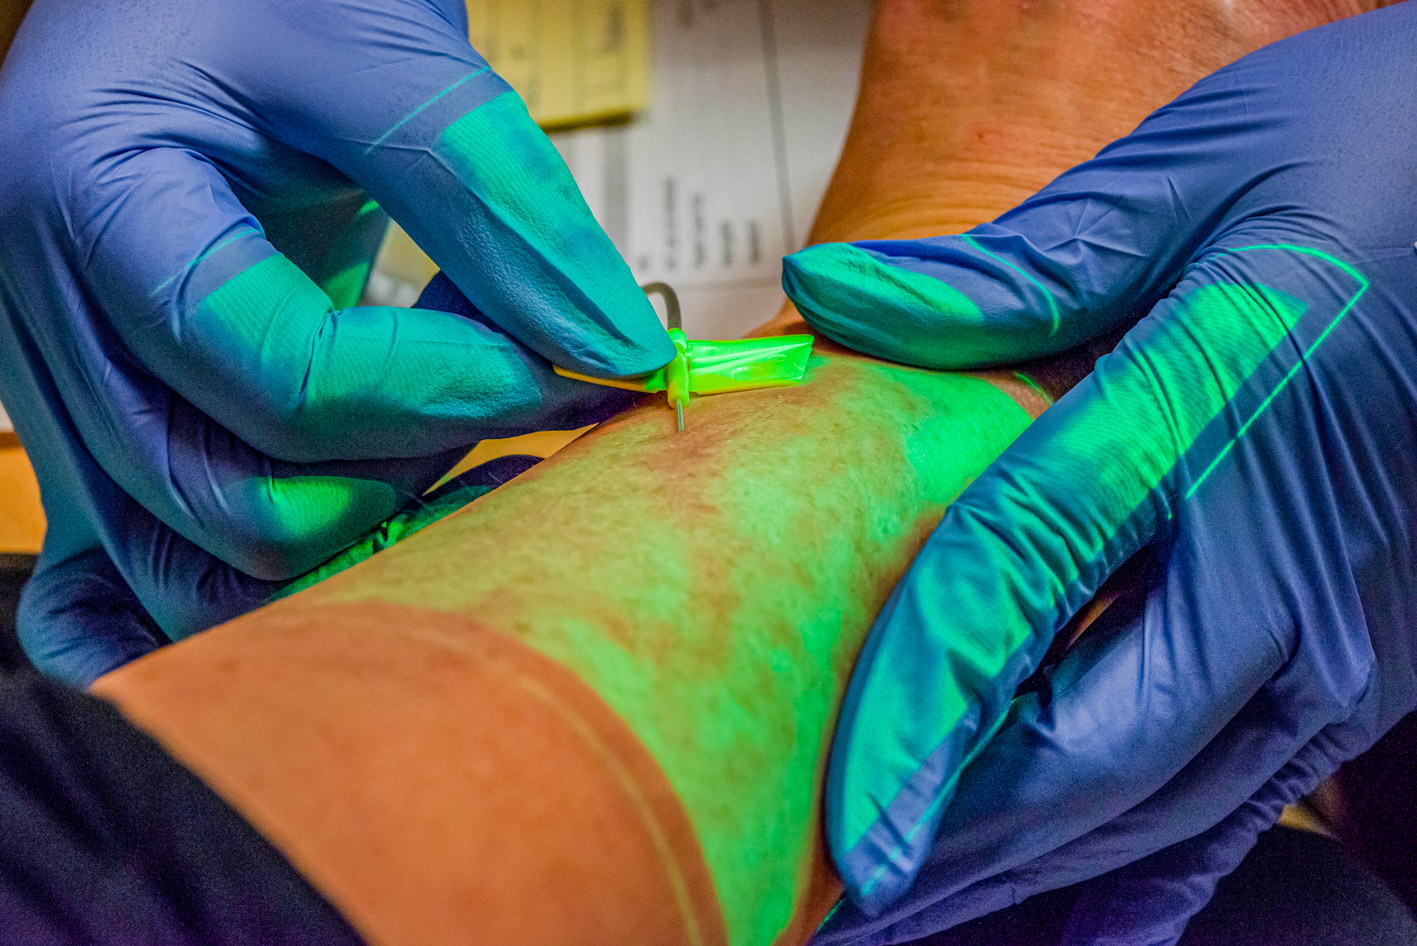 Gloved nurse using a vein finder and butterfly setup to insert a hypodermic needle into a superficial vein on a patient's arm for an IV infusion.